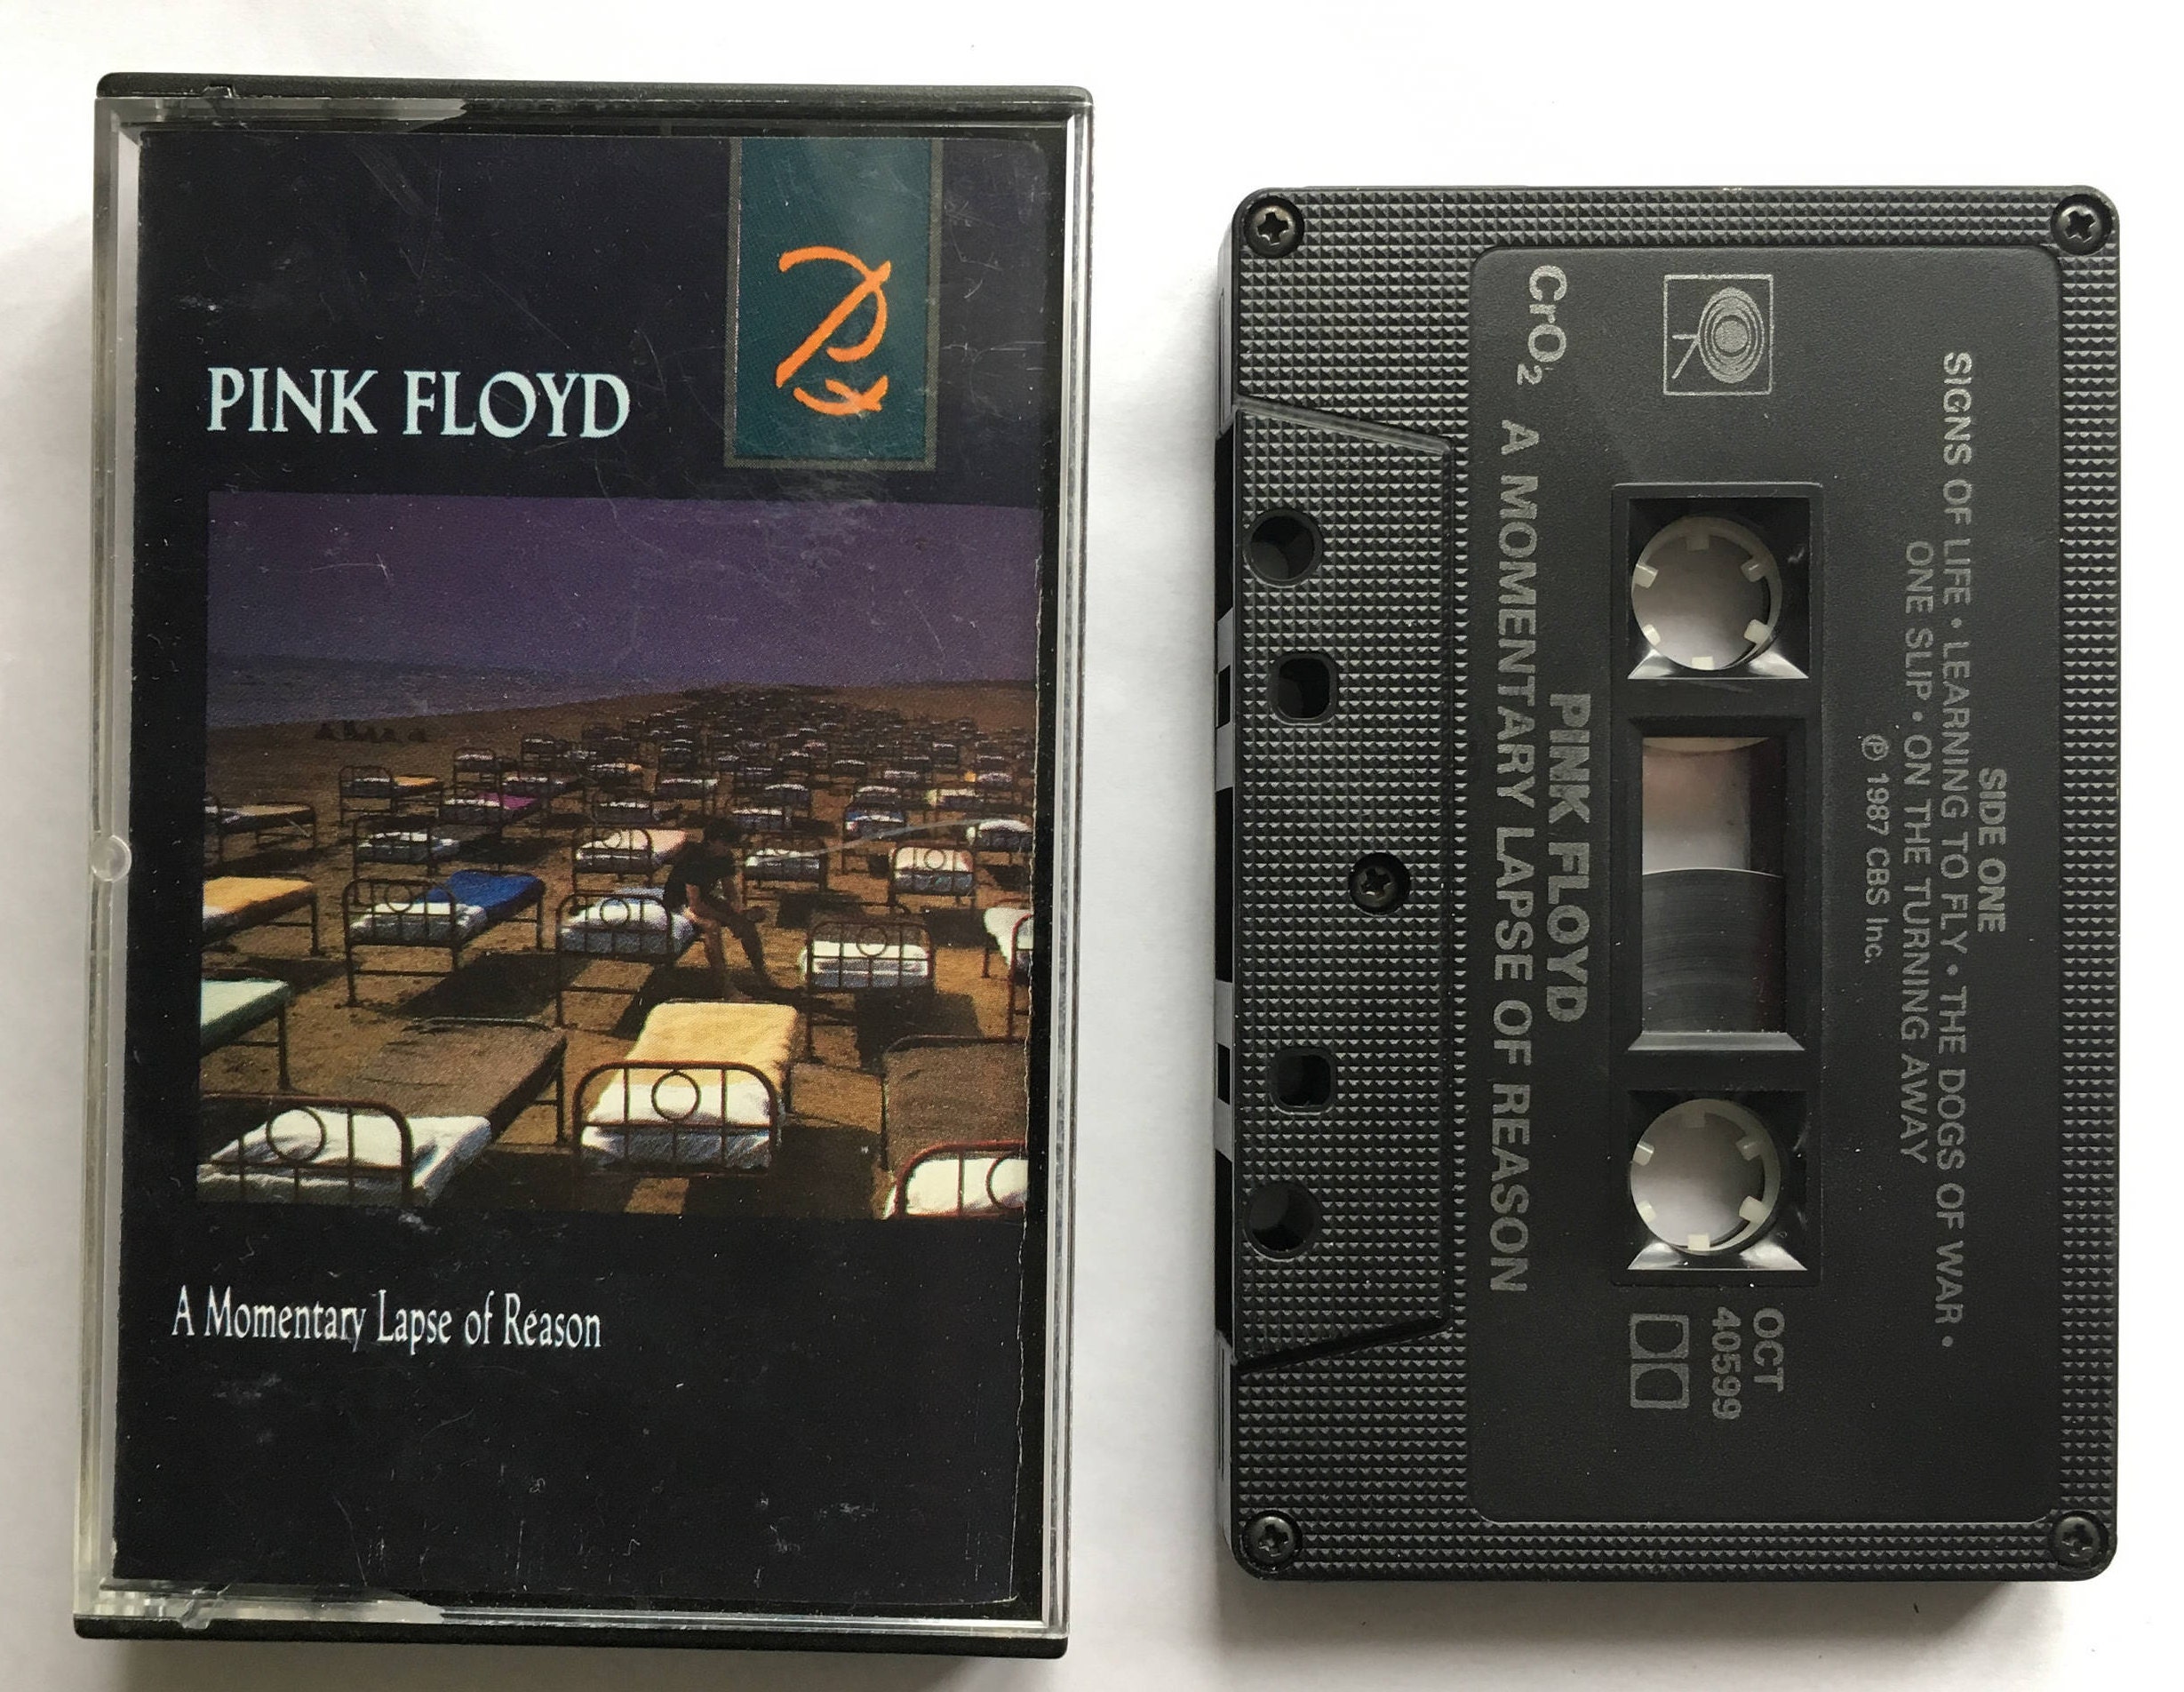 Pink Floyd - A Momentary Lapse of Reason - vintage cassette tape - classic  progressive rock - Roger Waters - 1987 - Free shipping Canada USA